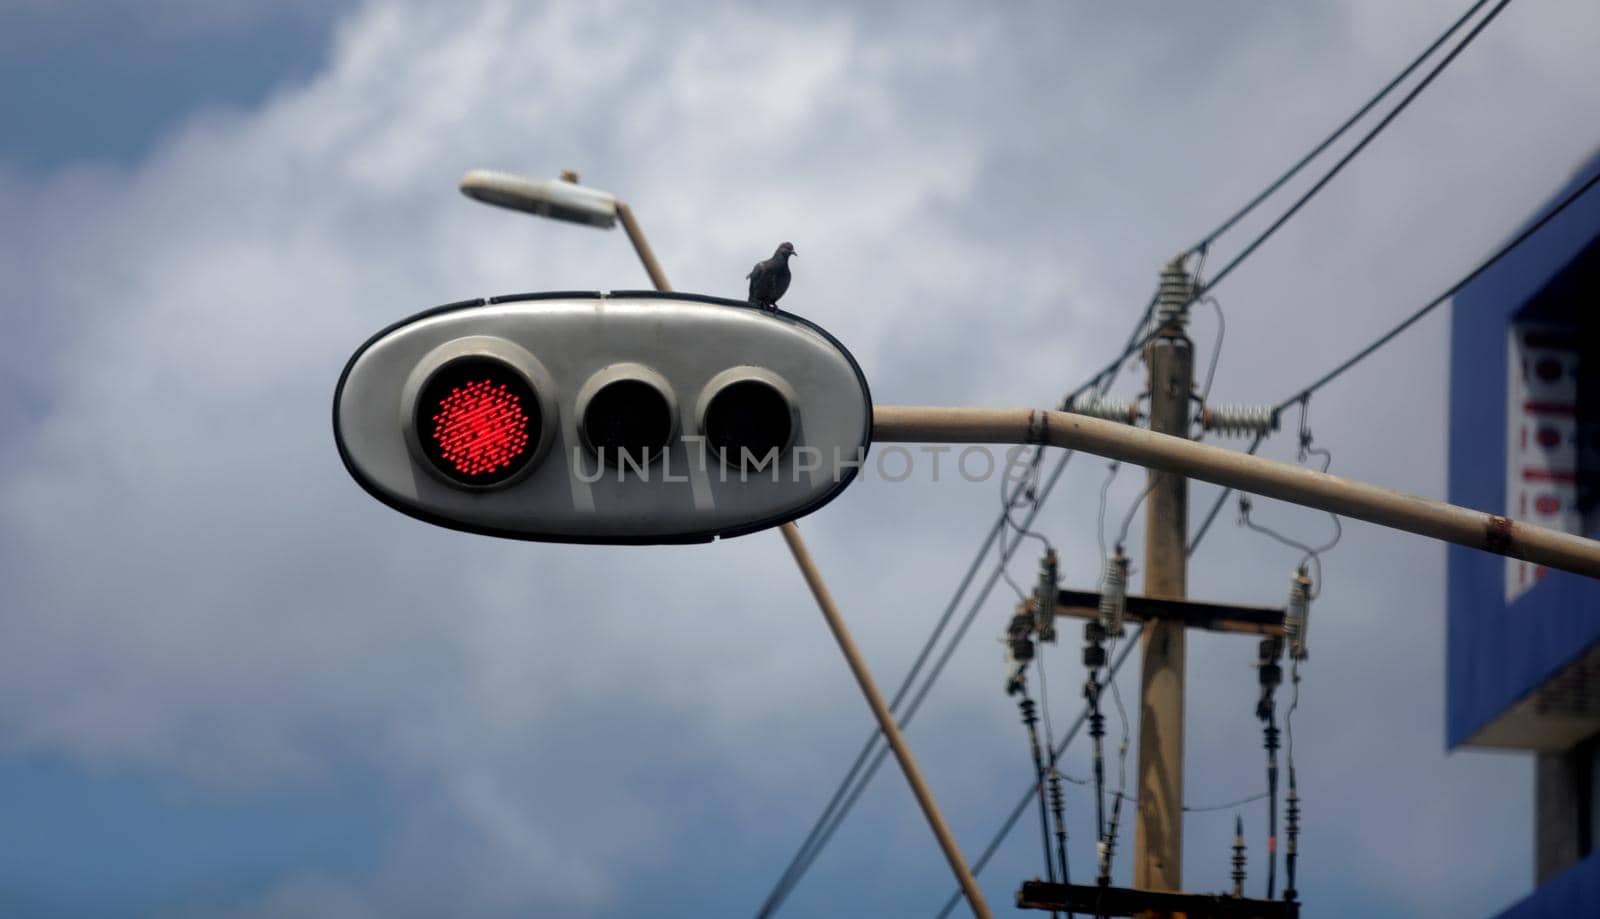 salvador, bahia / brazil - november1, 2019: Passoro is seen perched on traffic light in intersection in the city of Salvador.